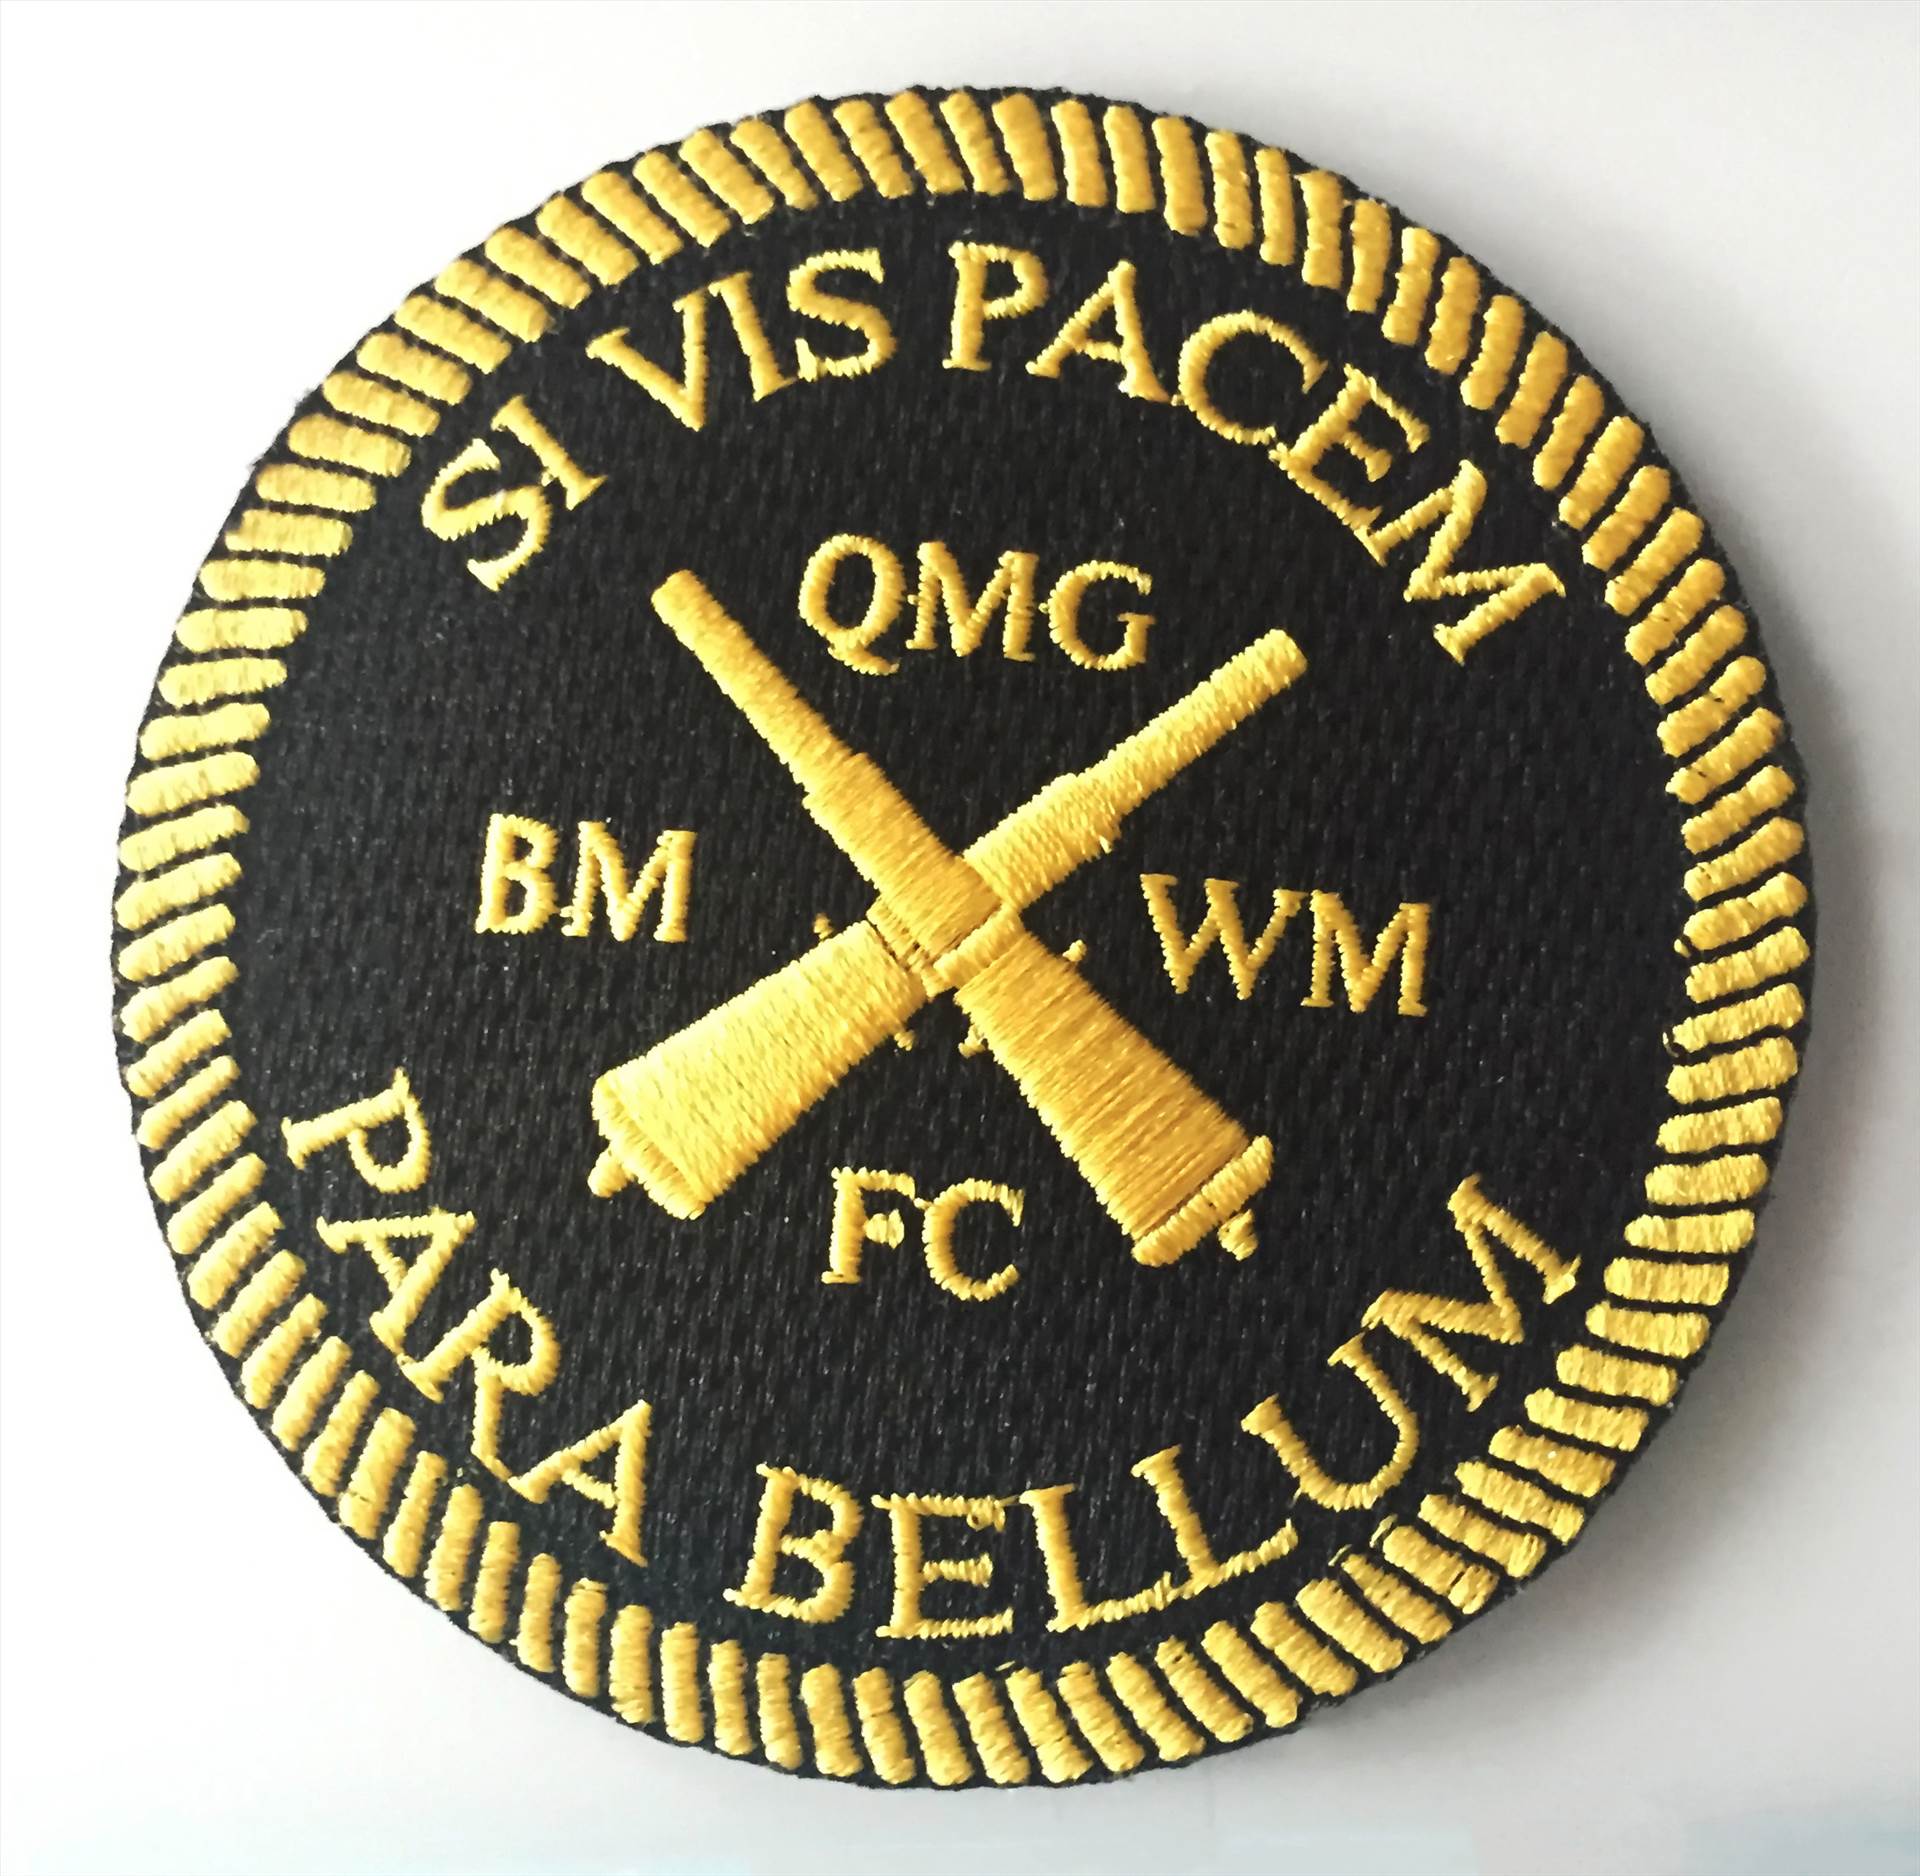 Navy SI VIS PACEM Embroidered Patch Navy SI VIS PACEM PARA BELLUM RAN Embroidered Patch by johntorcasio